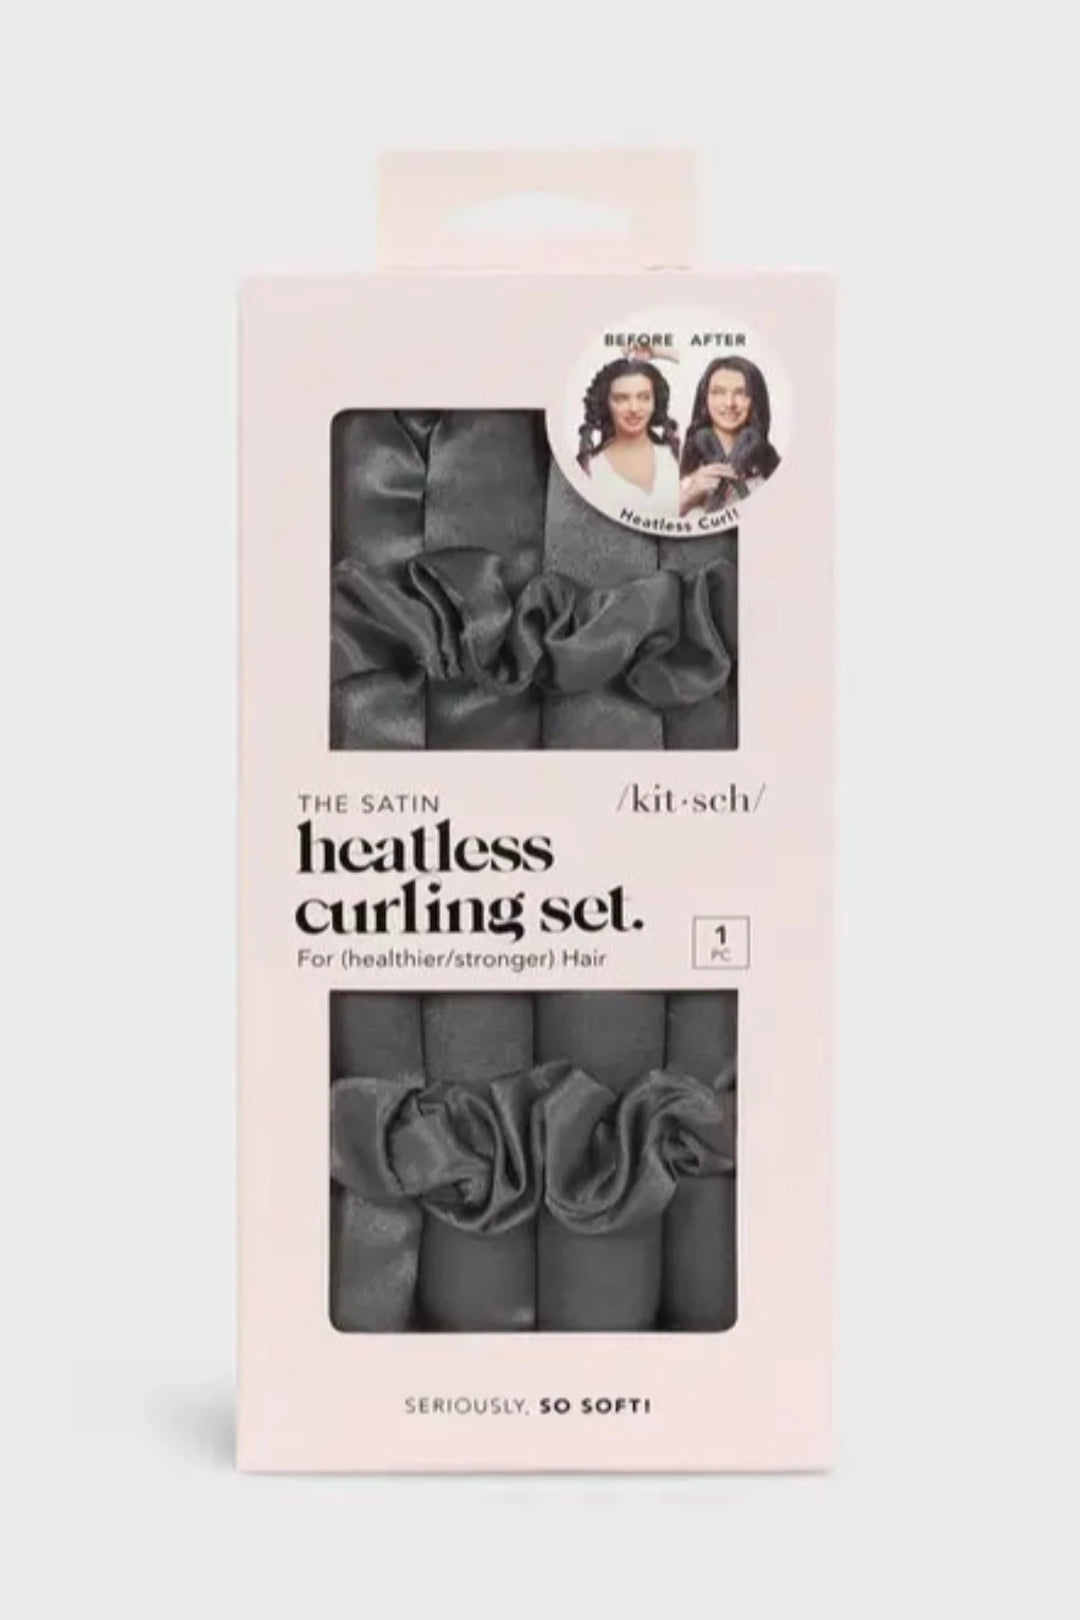 Kitsch Satin Heatless Curling Set allows you to create the perfect waves or curls for a beautiful style - without the heat damage! The satin construction keeps your hair frizz-free and prevents breakage. Simple to use and can be worn day or night! Set includes a foam curling rod & two scrunchies that gently secure your hair.